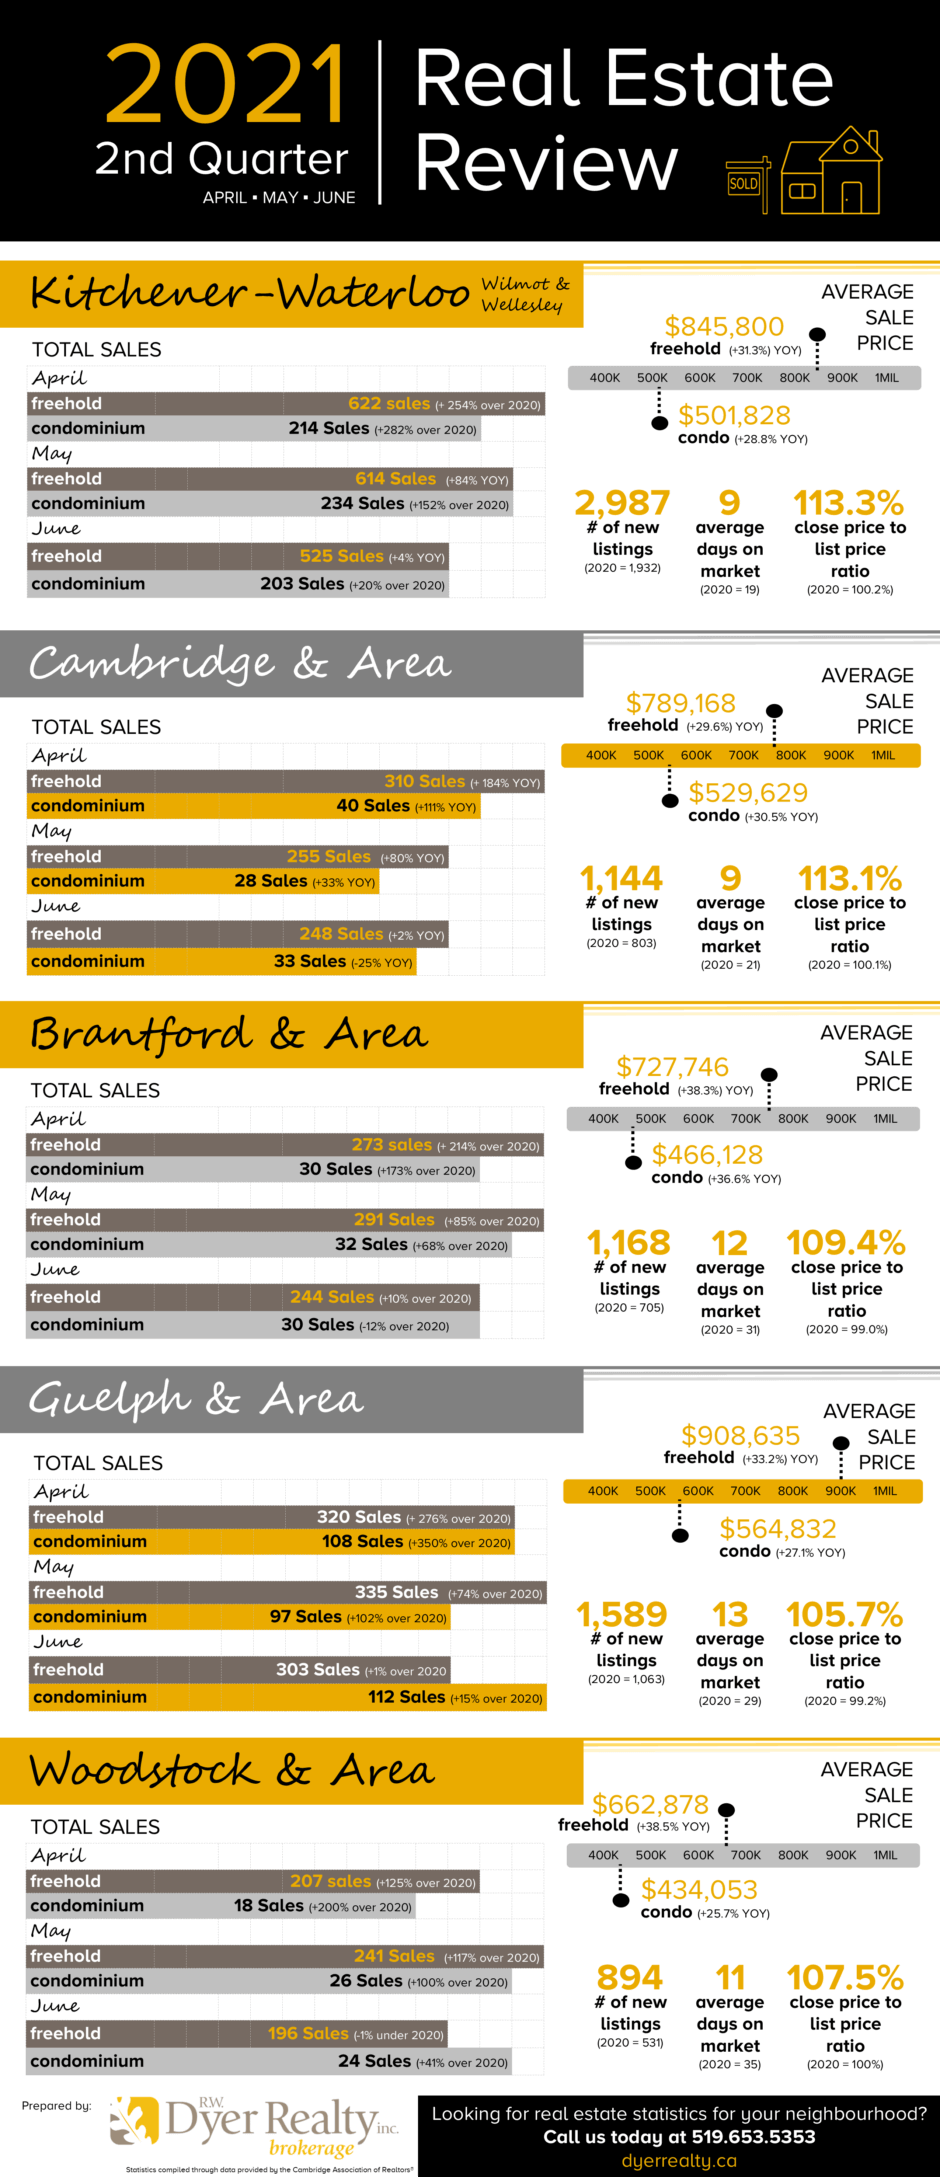 Real Estate Sales Statistics for the second quarter of 2021 for Kitchener-Waterloo, Cambridge, Guelph, Brantford, Woodstock and areas.